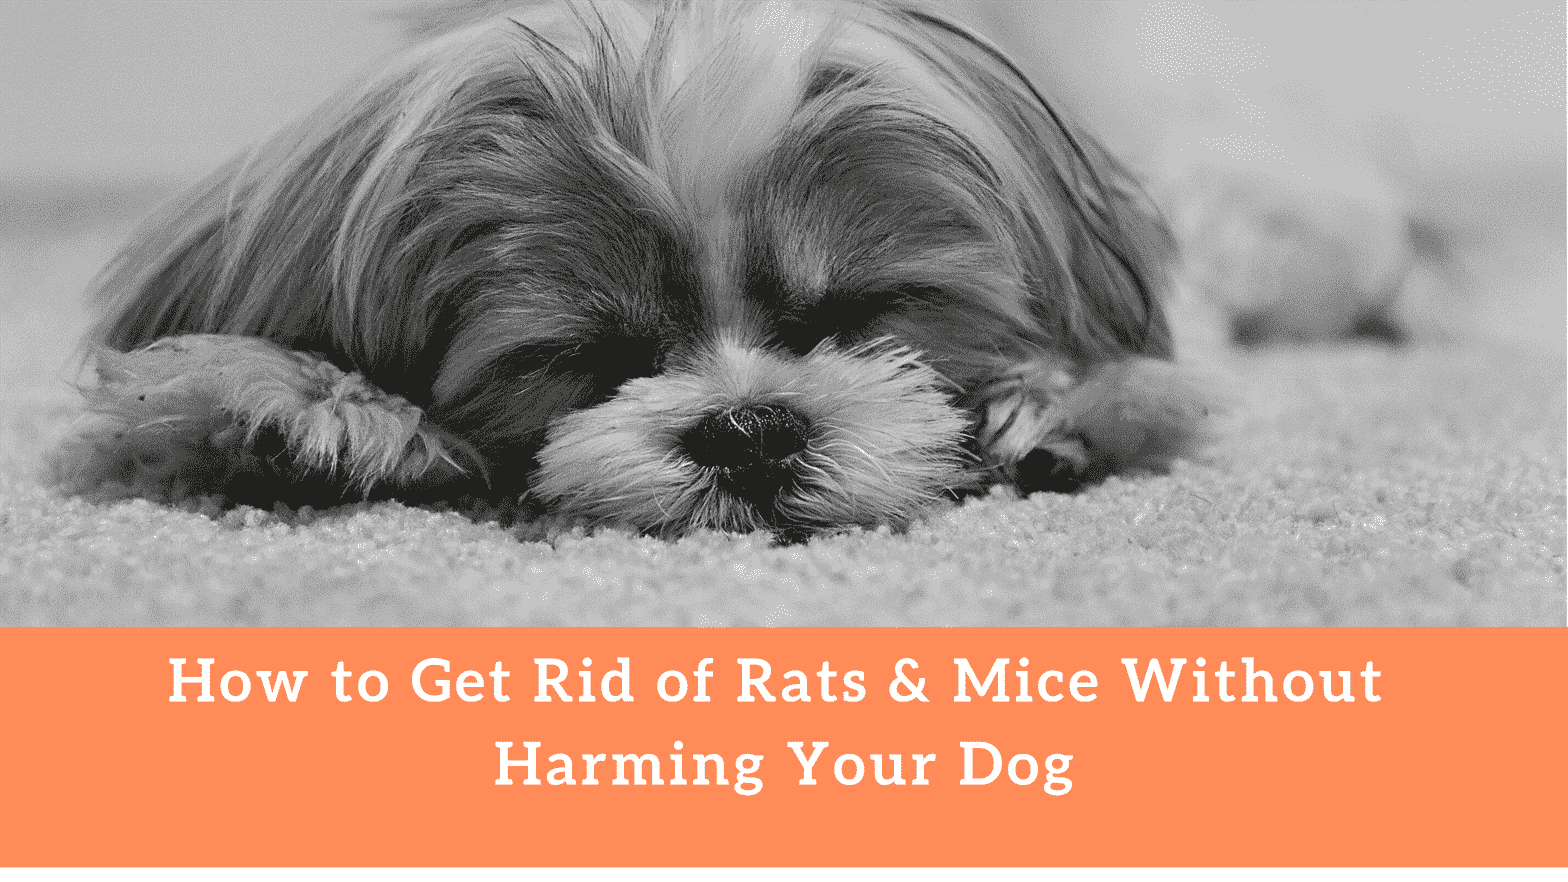 How to Get Rid of Rats & Mice Without Harming Your Dog